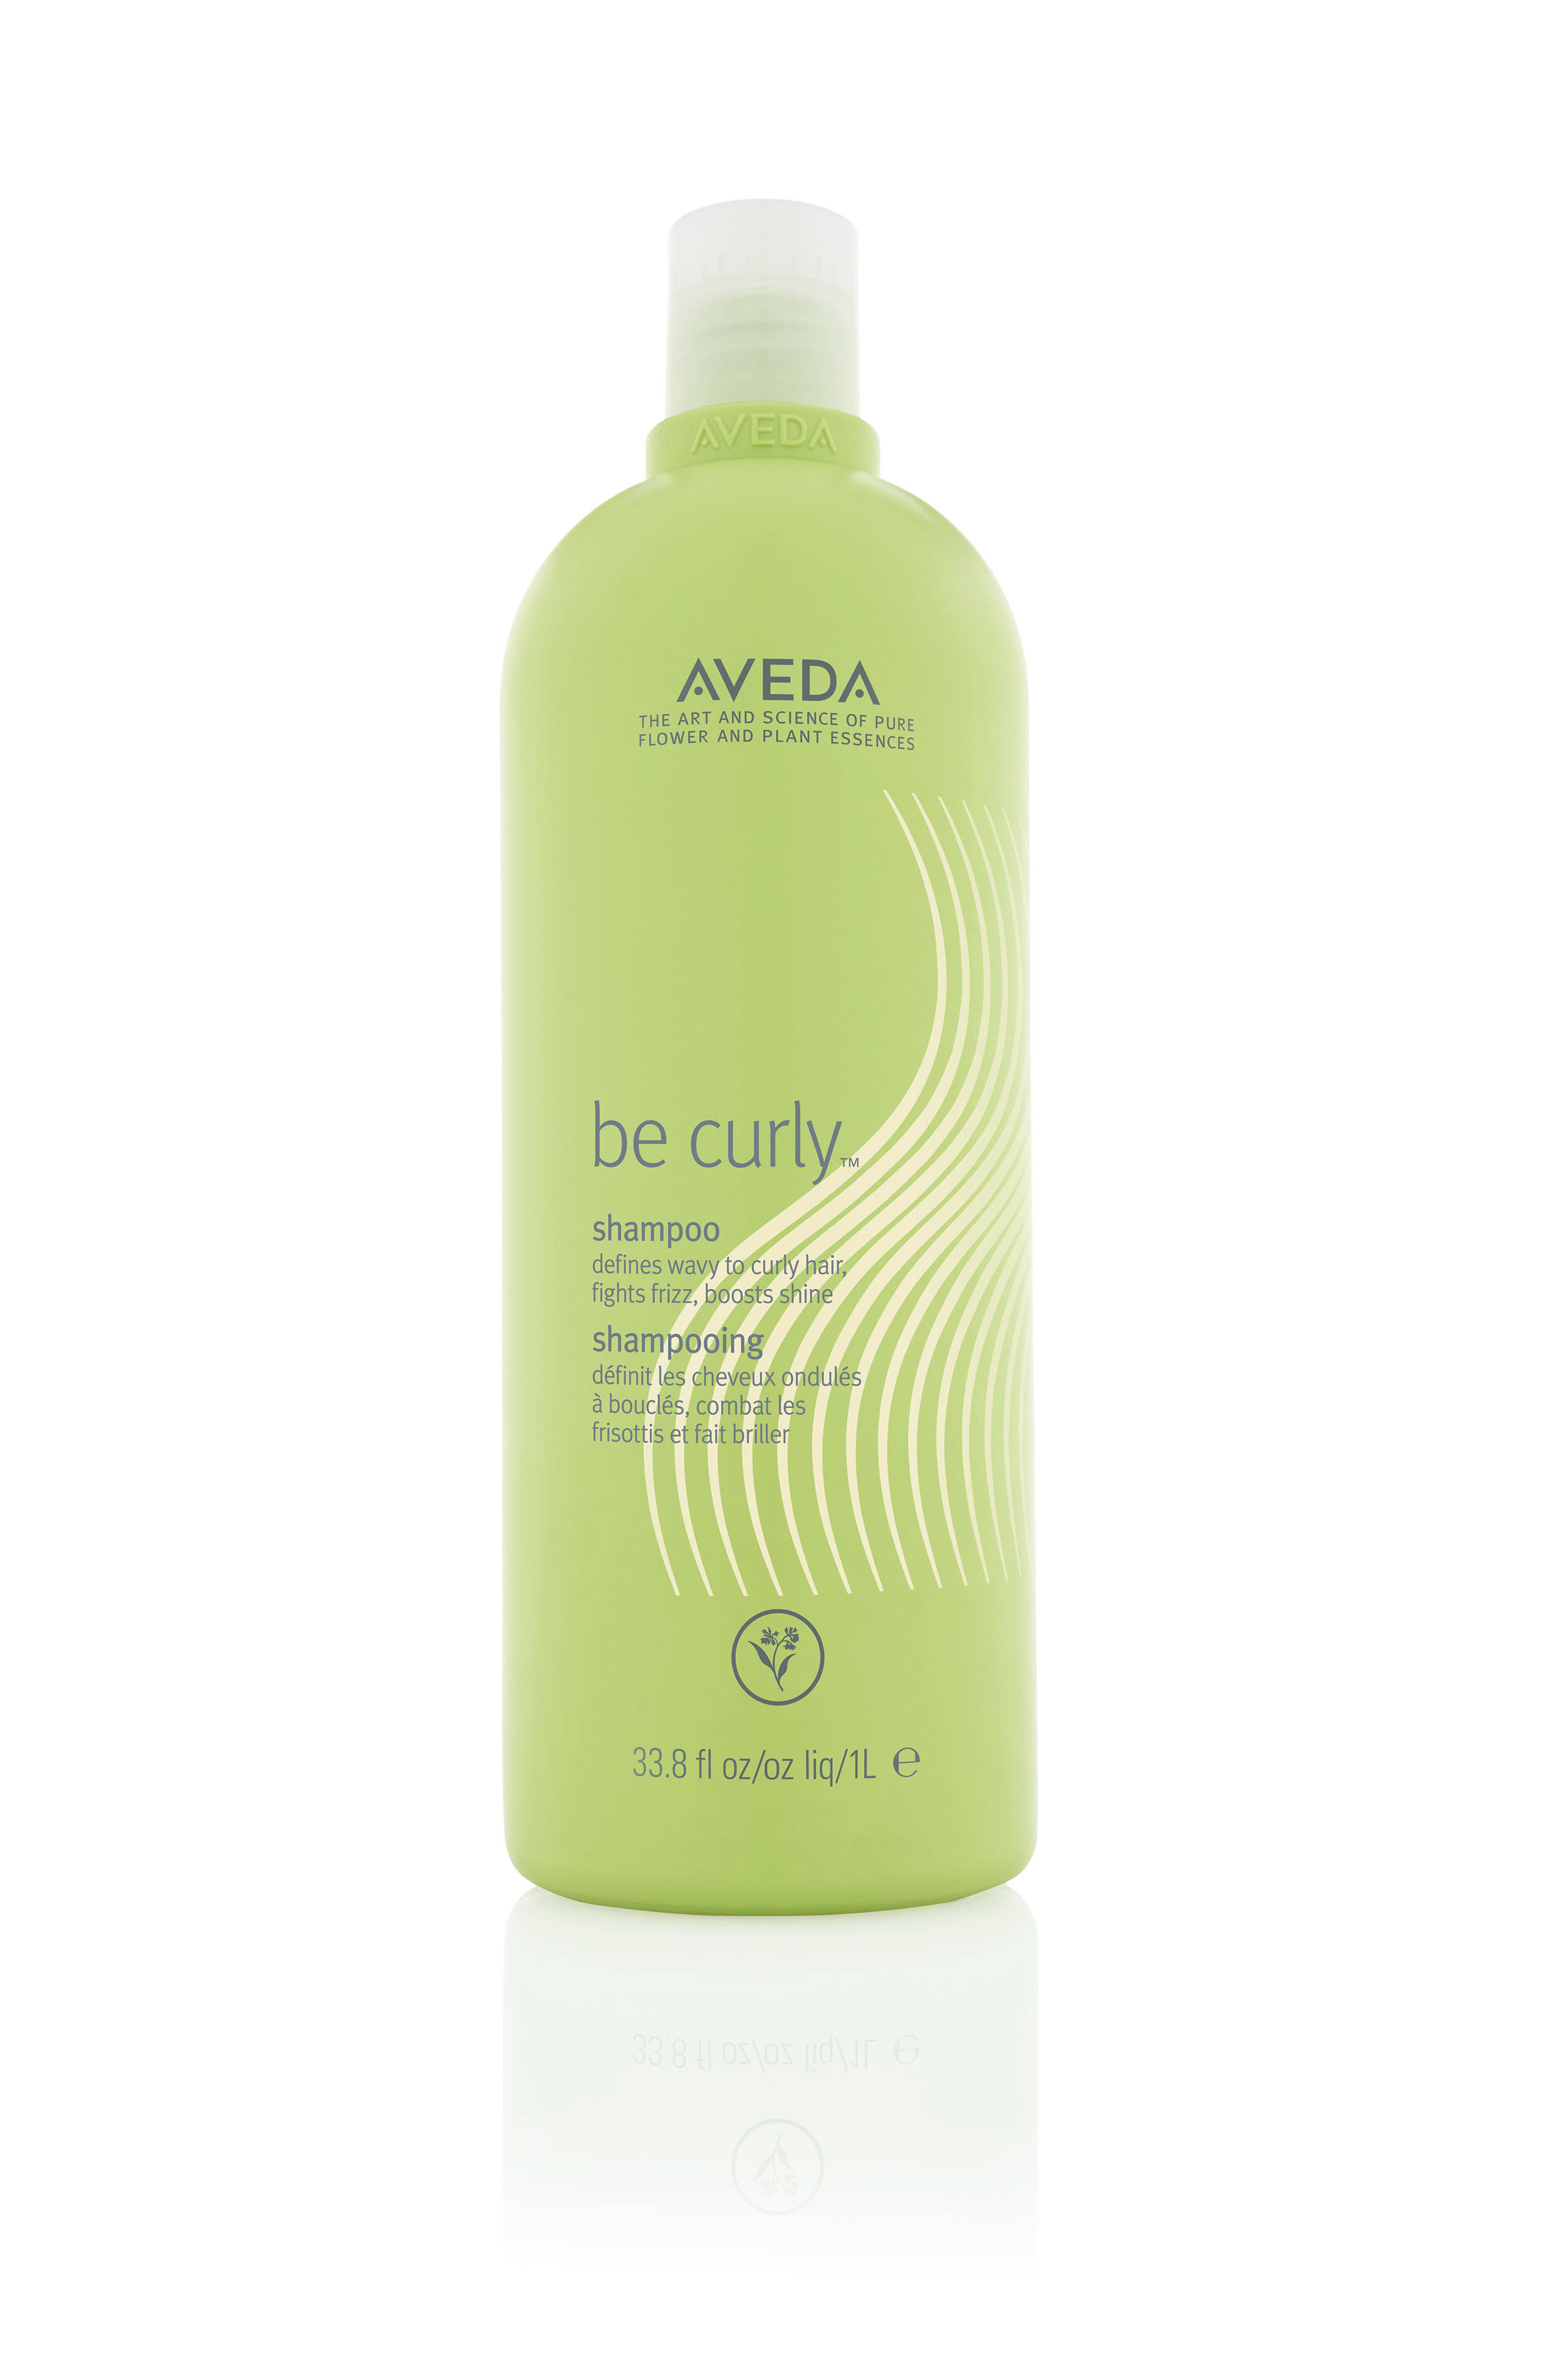 Aveda be curly shampoo 1000 ml, Green, large image number 0